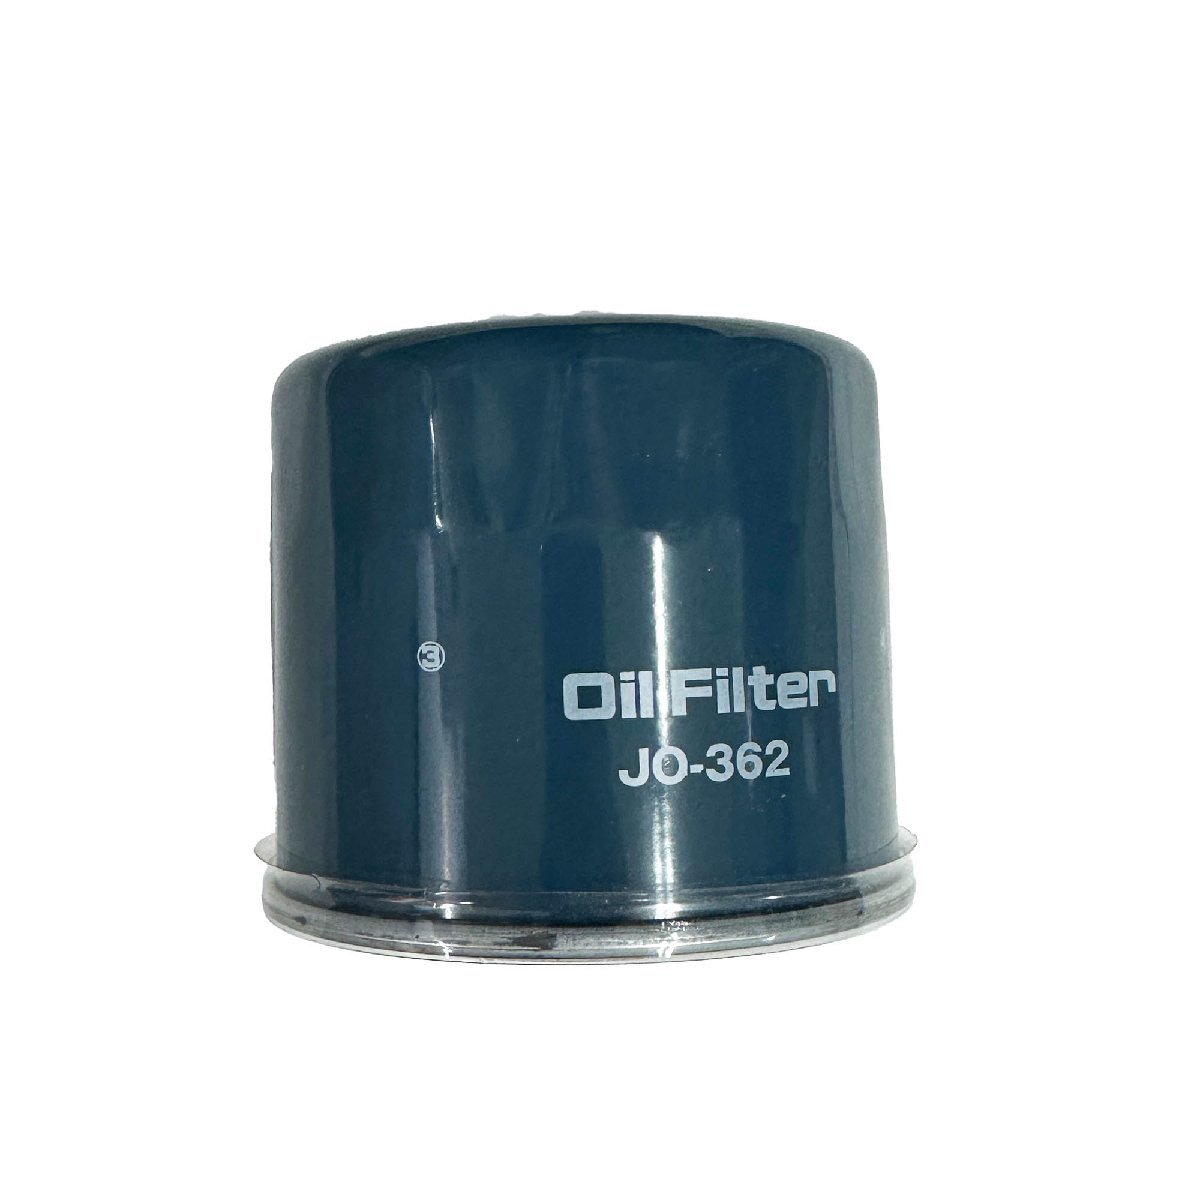 JO-362 TCM Bobcat 533 543 606. one part Union made product number necessary verification oil element oil filter industrial machinery for 